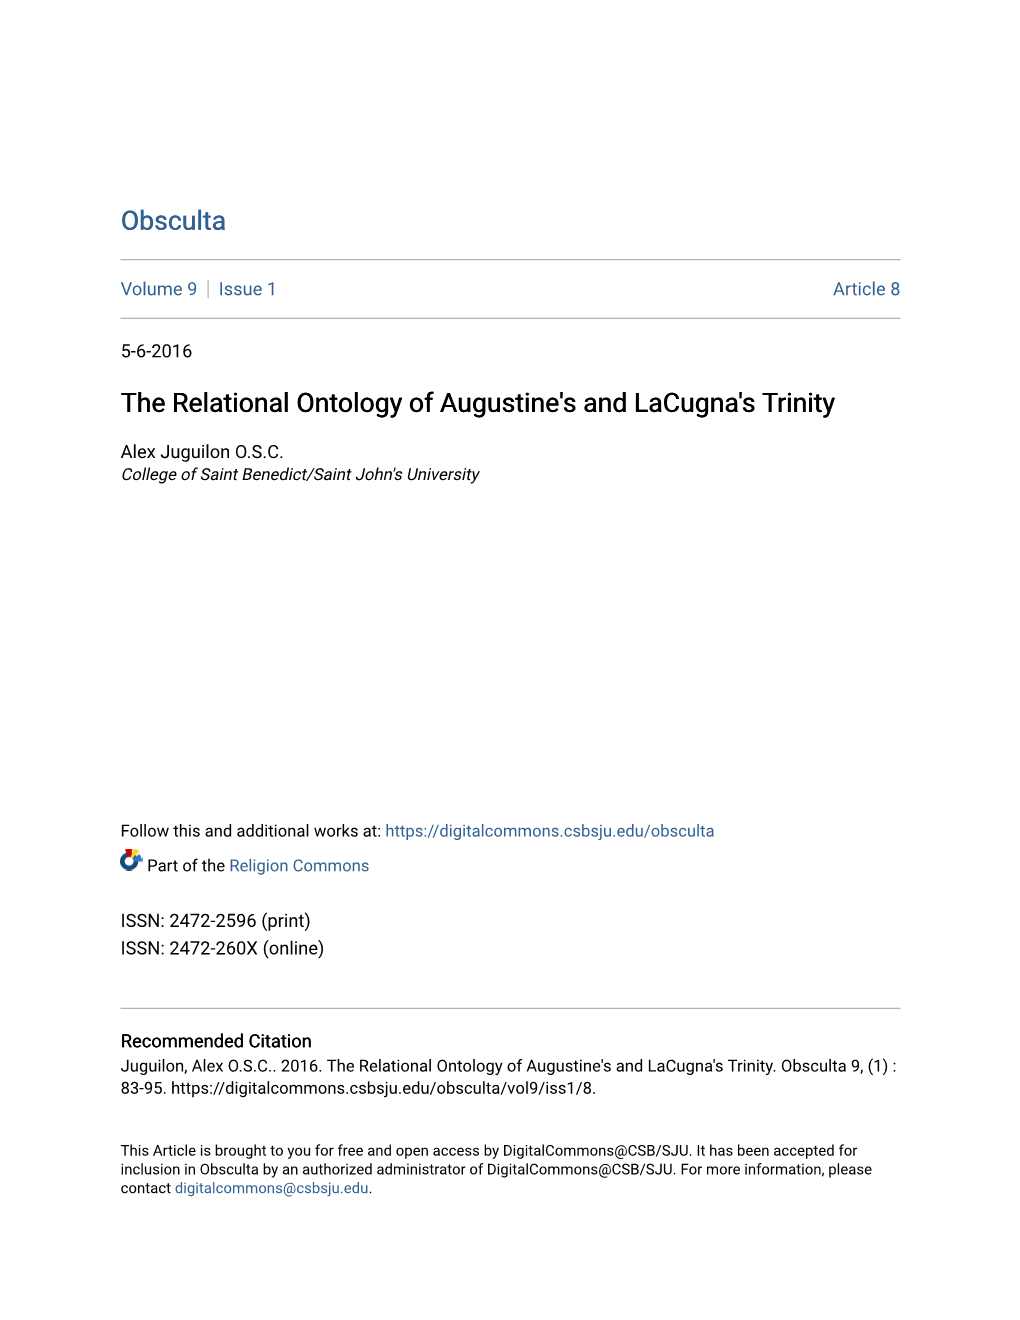 The Relational Ontology of Augustine's and Lacugna's Trinity